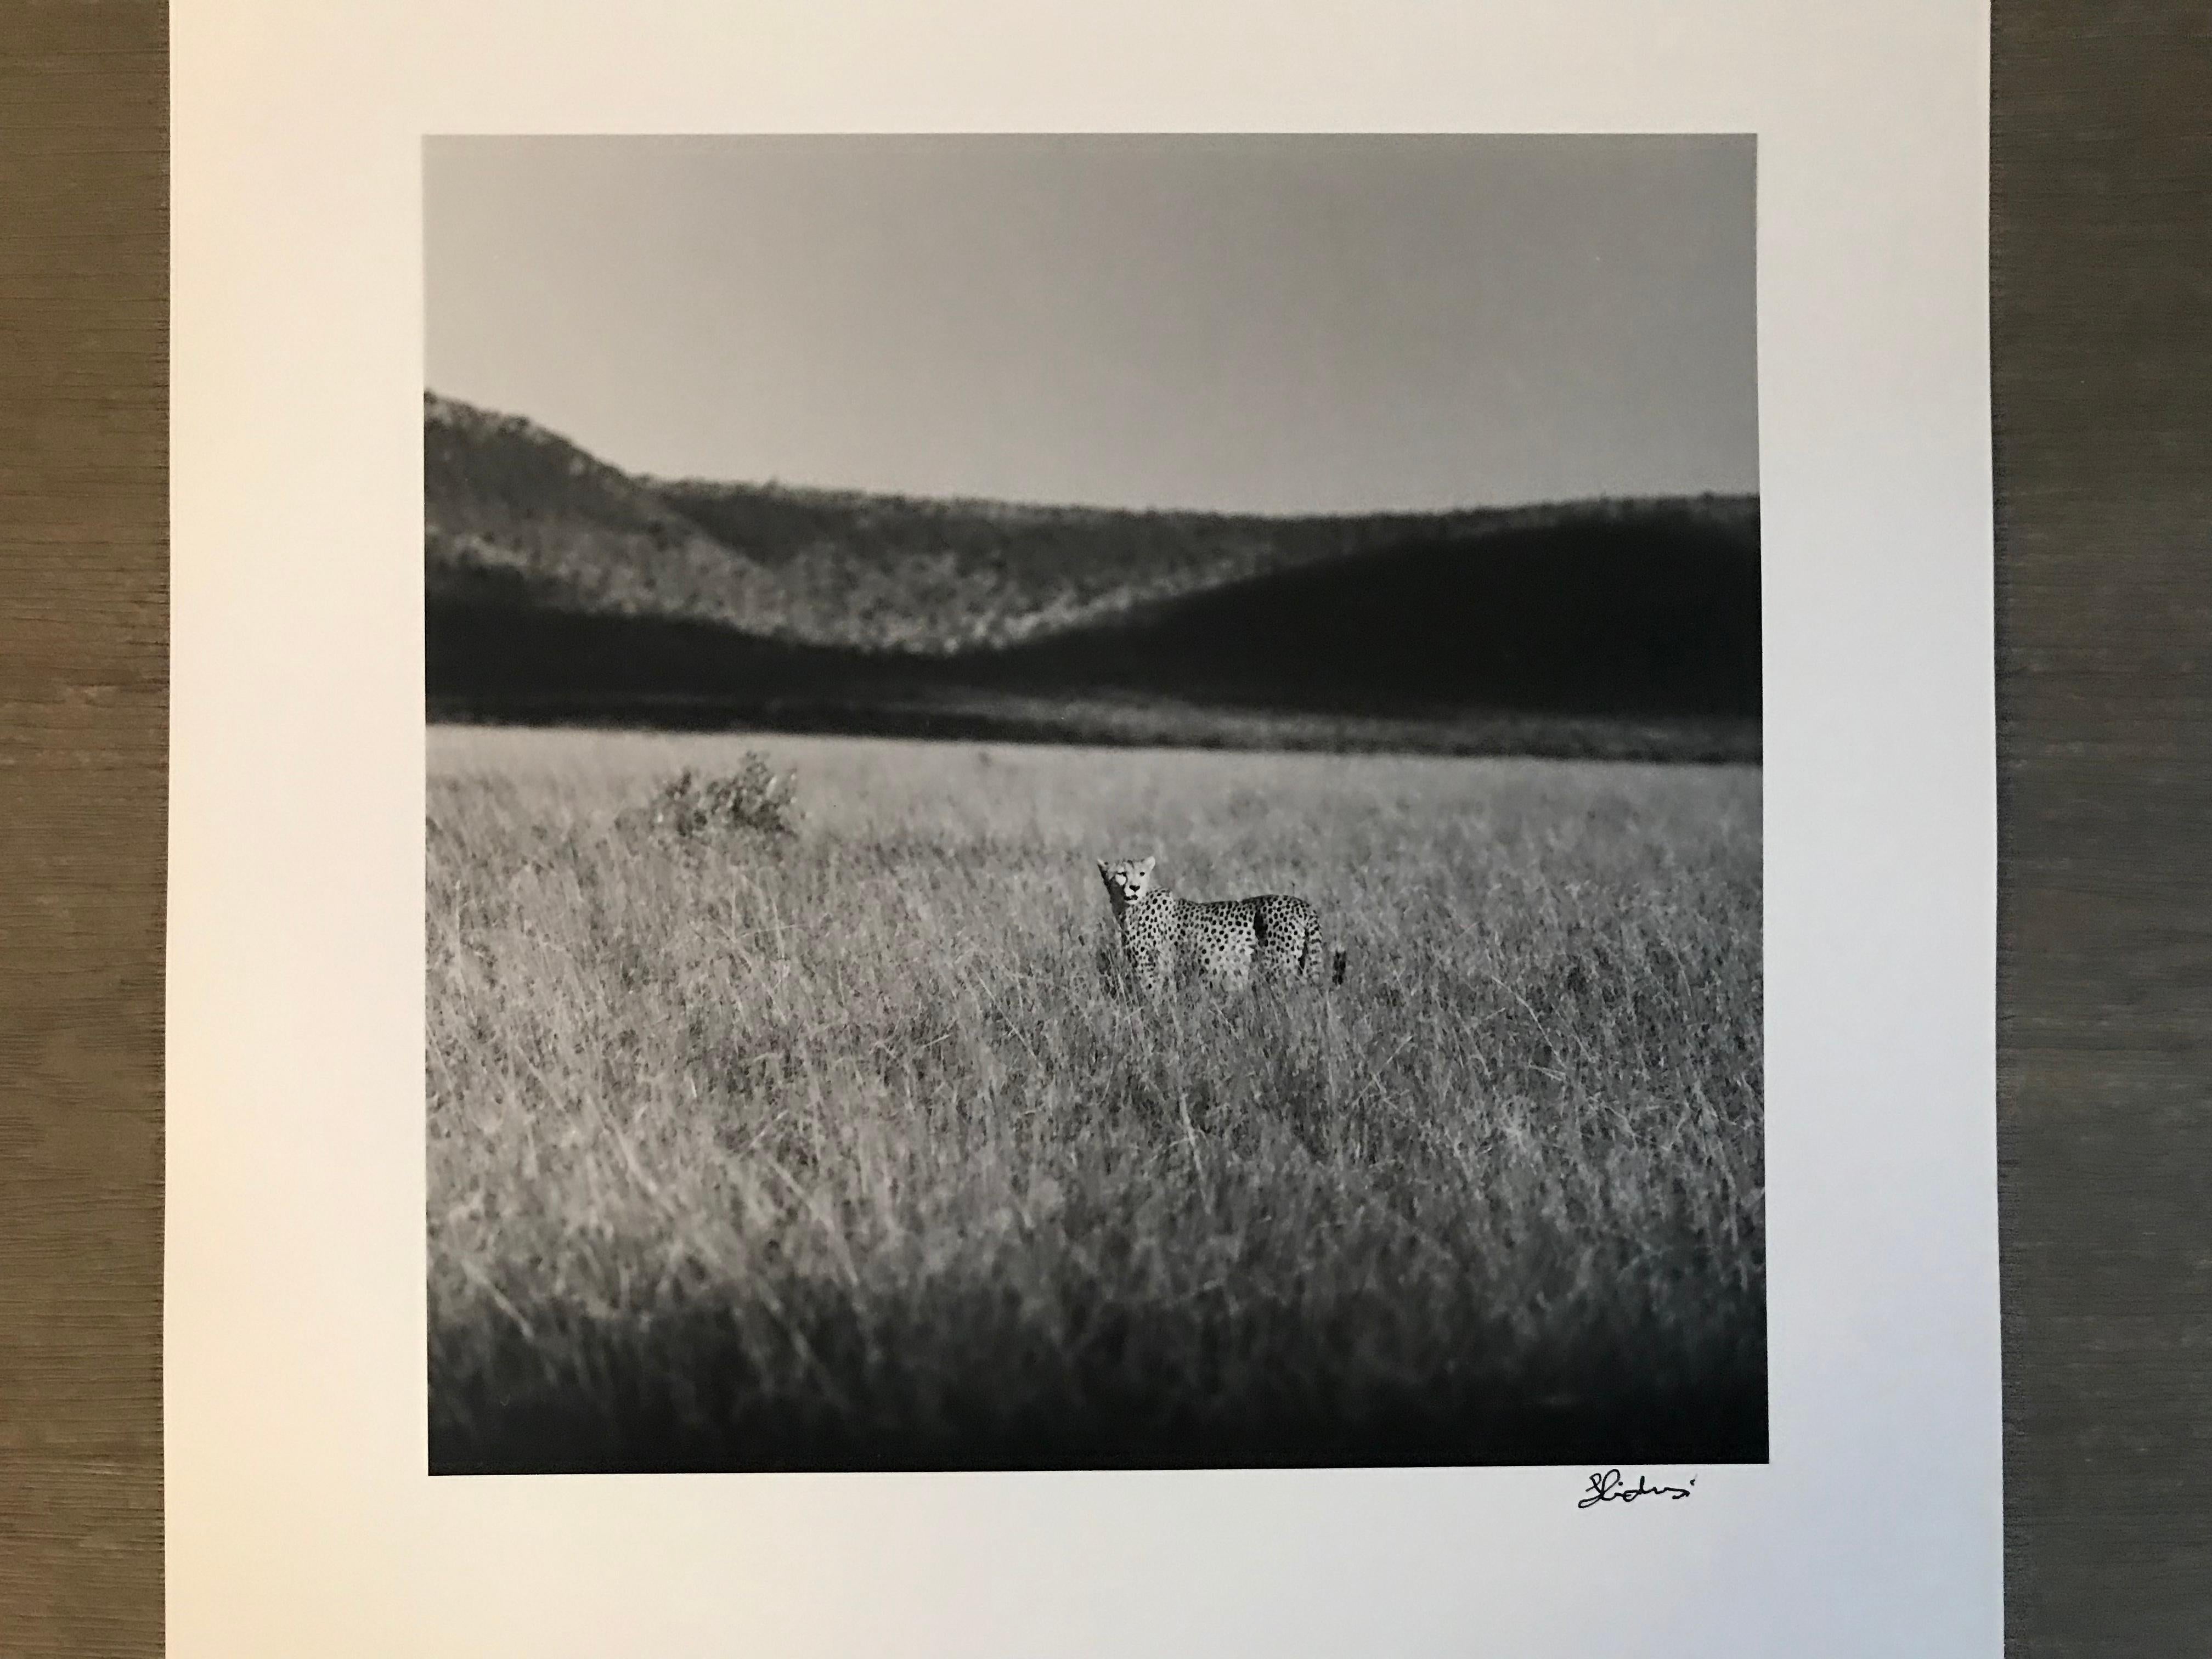 Photos of Hideoki™ are being sold for the first time in 2019. This piece is a one and only original artist silver gelatin print affixed with his signature in front of the photo.                 

